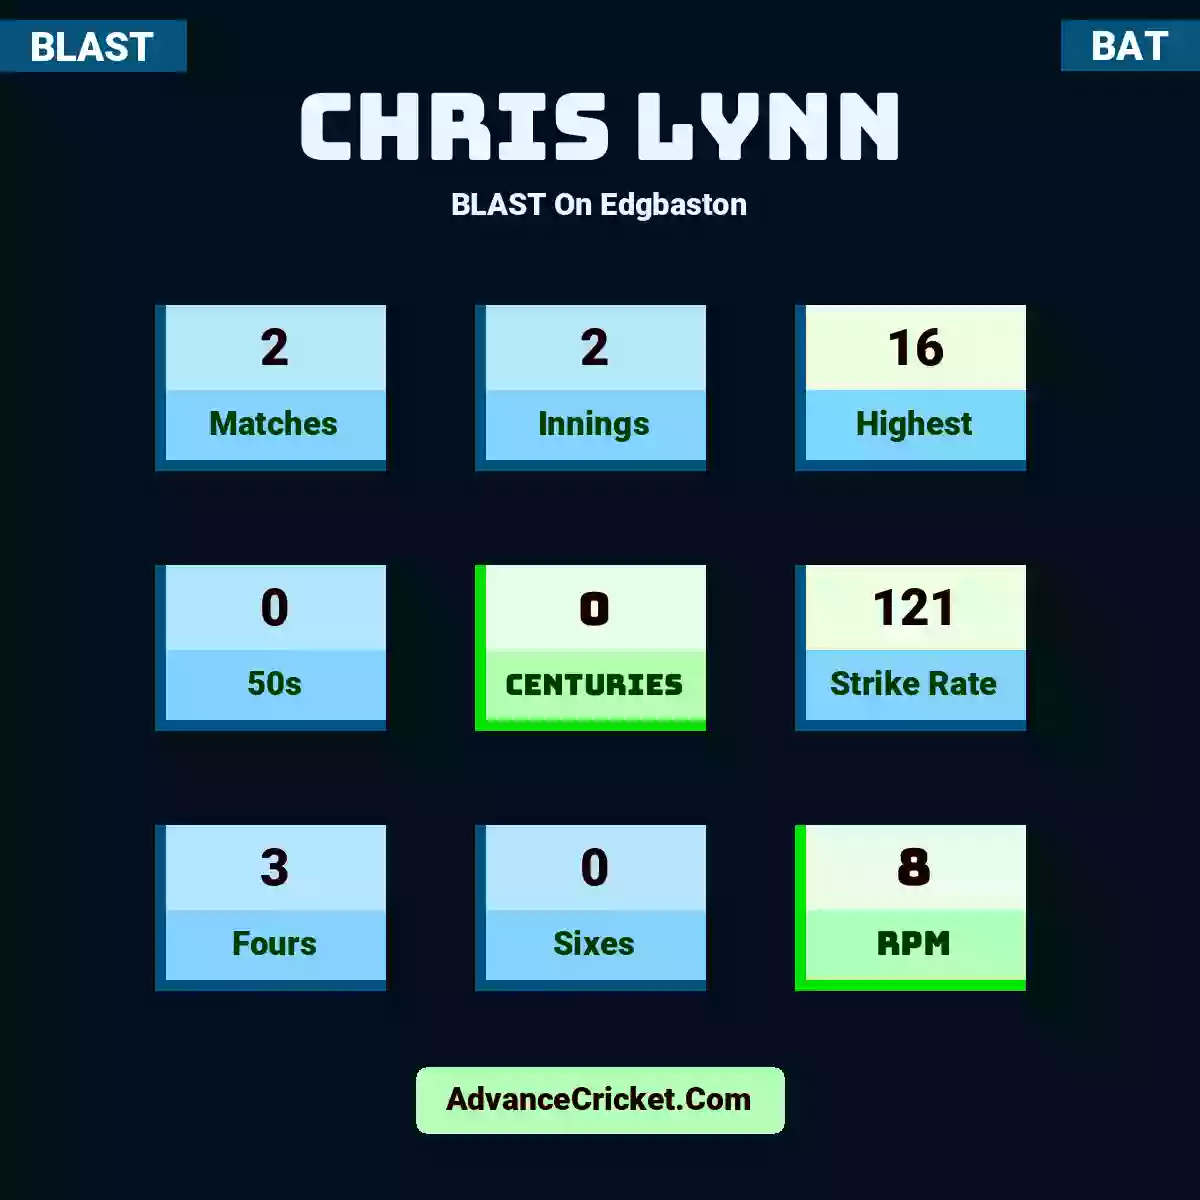 Chris Lynn BLAST  On Edgbaston, Chris Lynn played 2 matches, scored 16 runs as highest, 0 half-centuries, and 0 centuries, with a strike rate of 121. C.Lynn hit 3 fours and 0 sixes, with an RPM of 8.